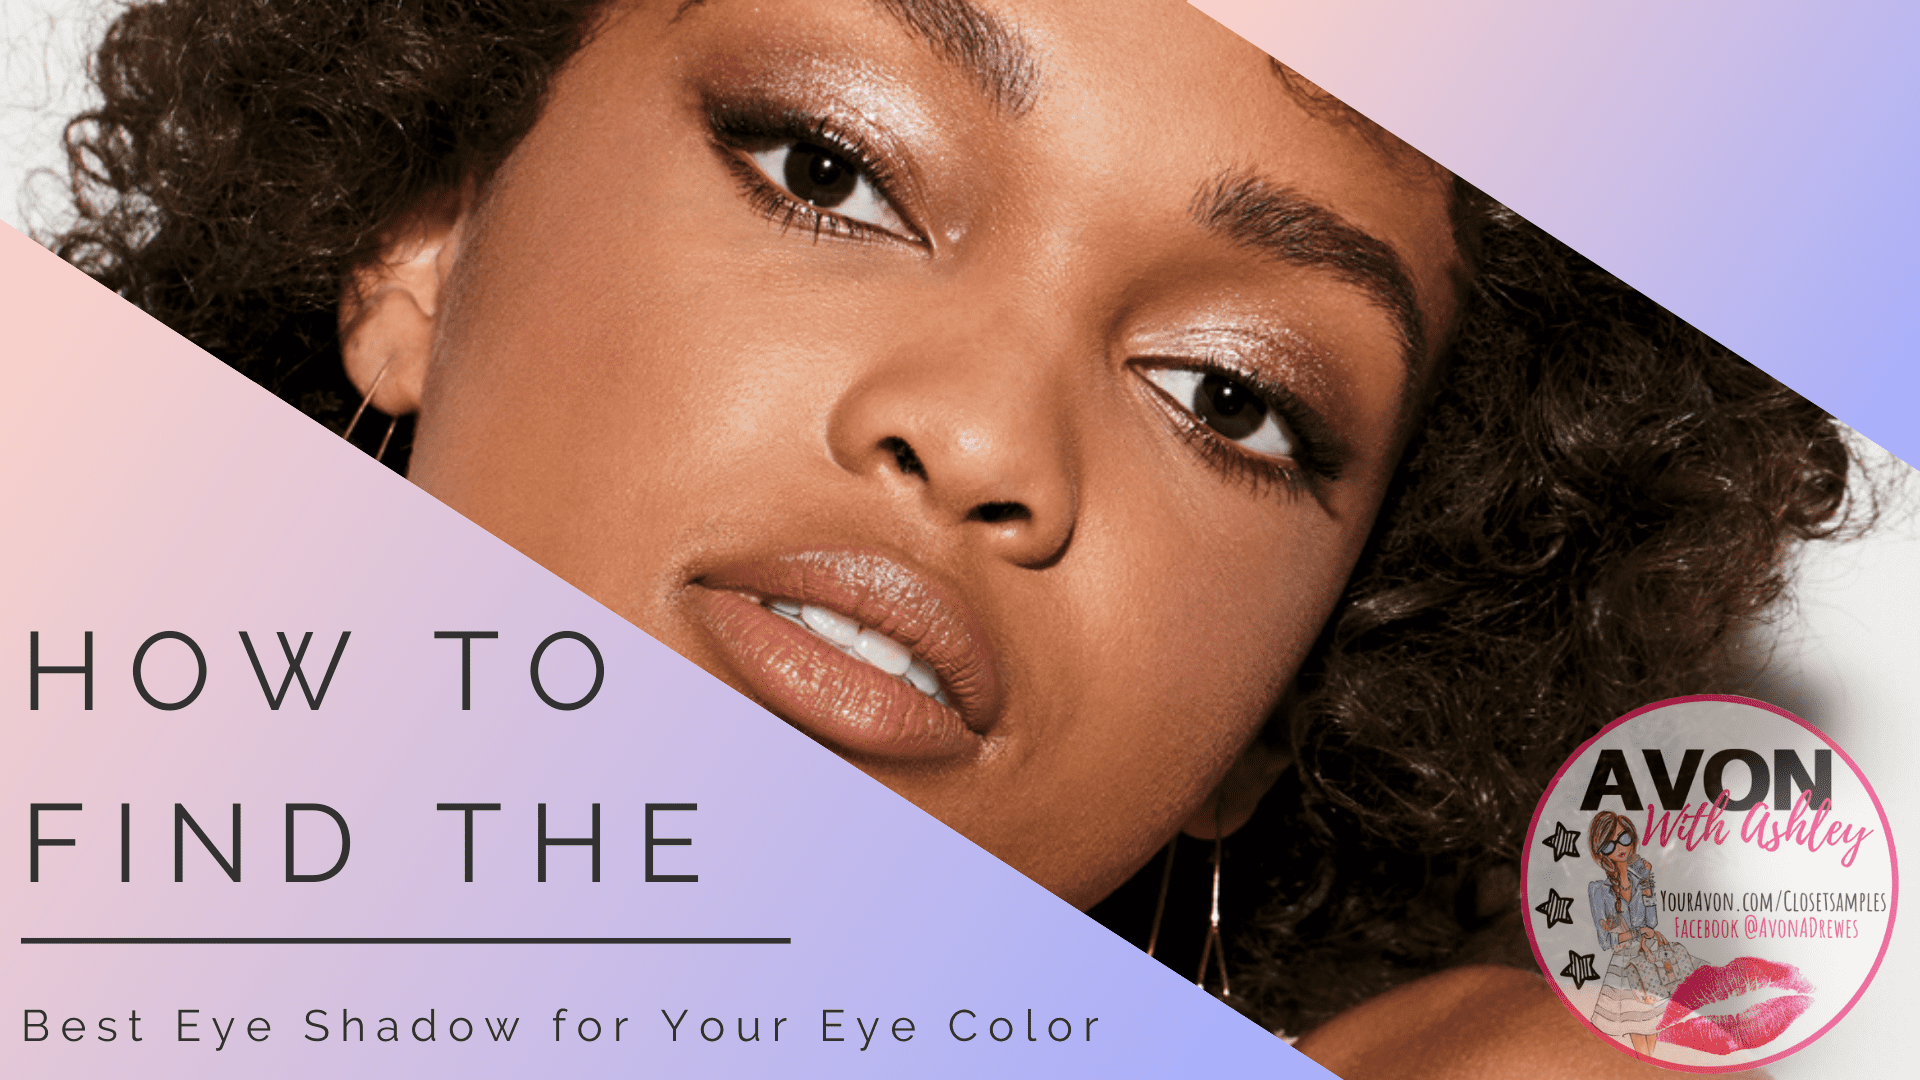 How-to-Find-the-Best-Eye-Shadow-for-Your-Eye-Color-Avon-Closetsamples.png